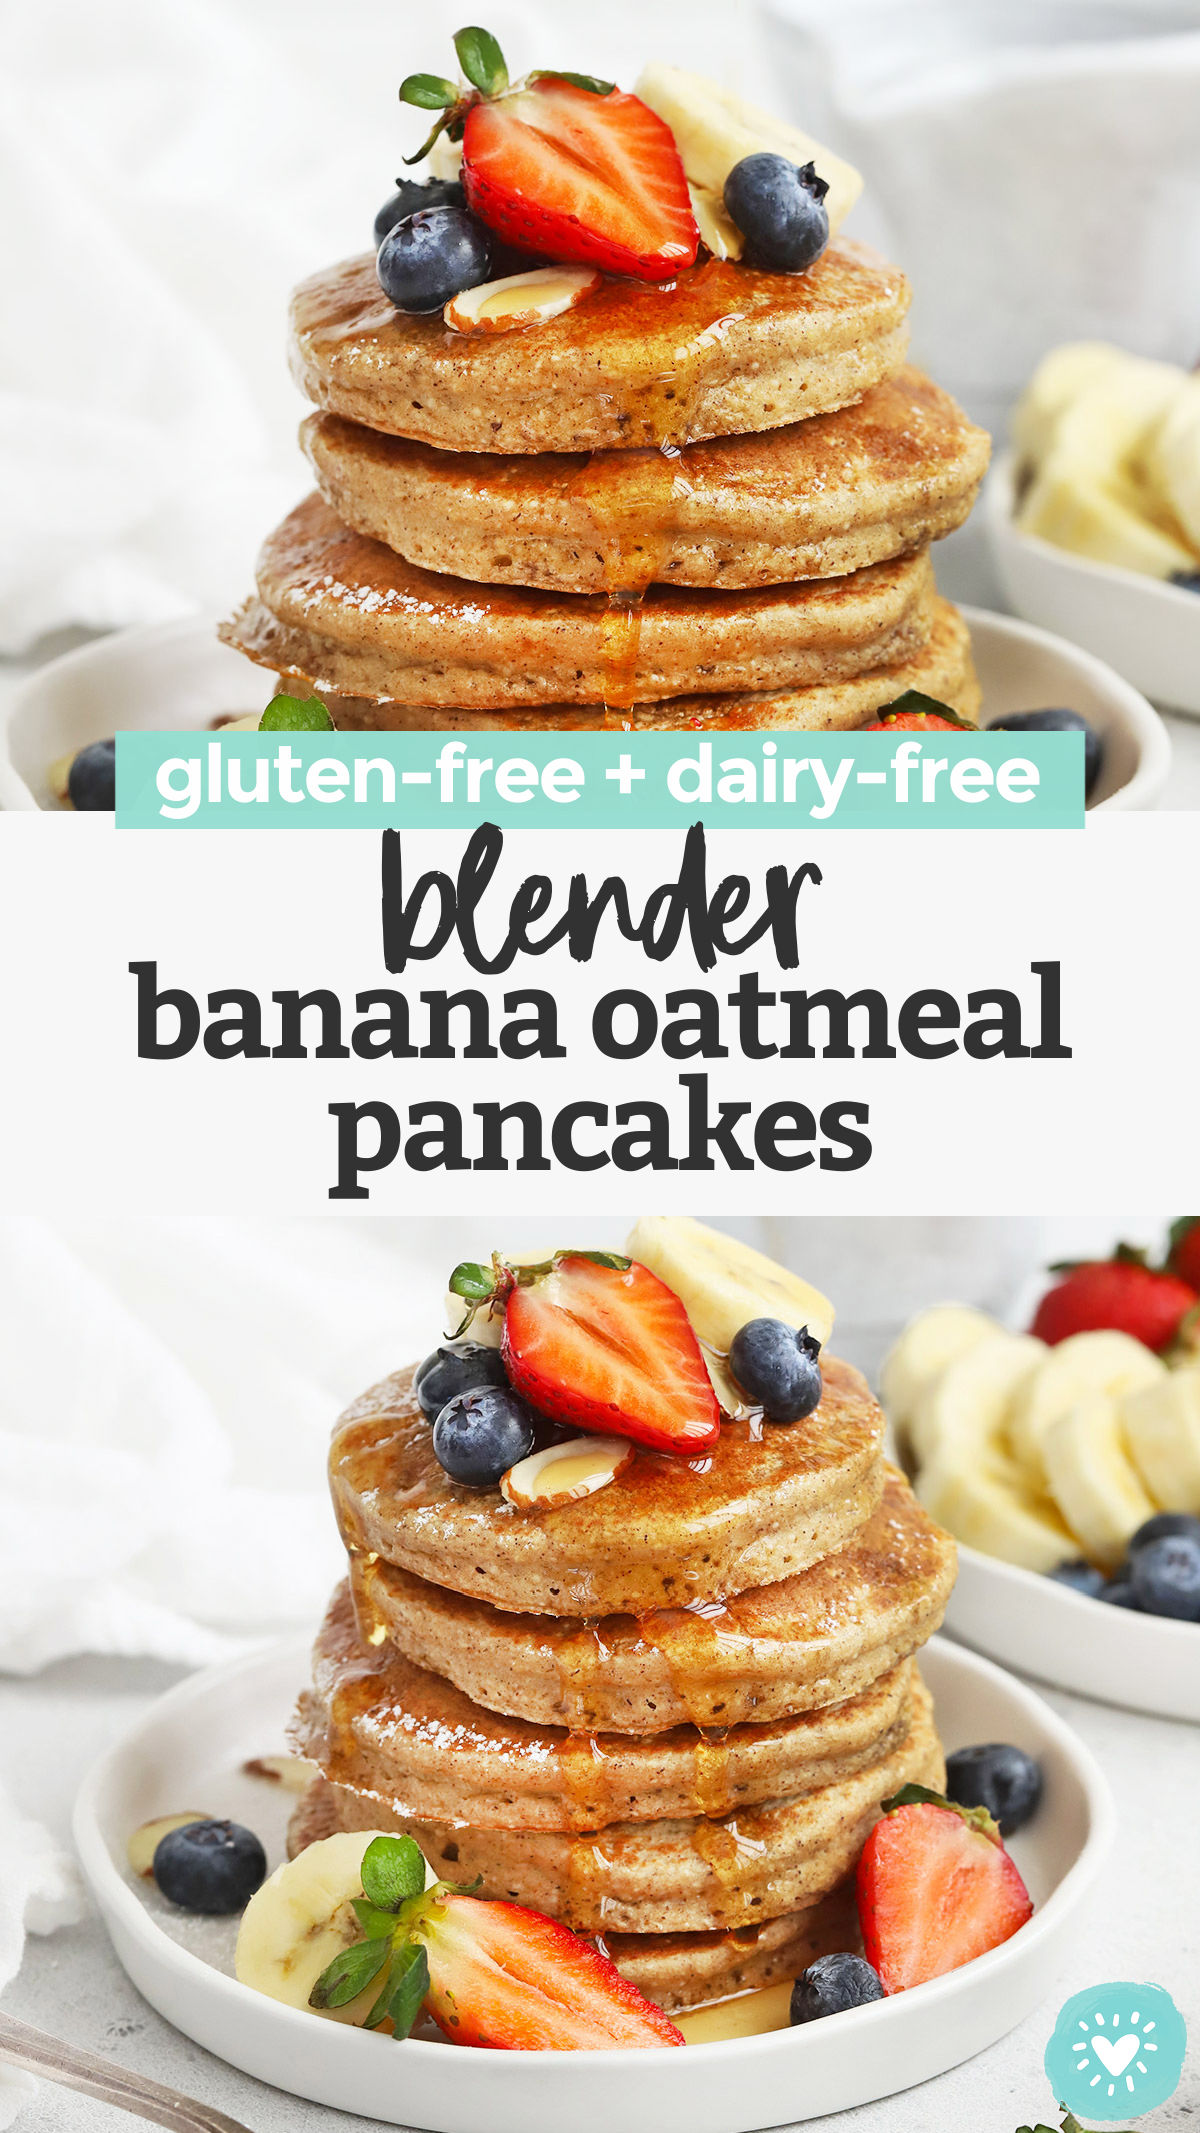 Blender Banana Oatmeal Pancakes - These healthy banana oatmeal pancakes are so easy! The perfect pancakes for weekdays or lazy weekends. (Gluten-free, dairy-free) // Healthy banana pancakes // banana oat pancakes // gluten-free banana pancakes #pancakes #glutenfree #healthybreakfast #banana #oatmeal